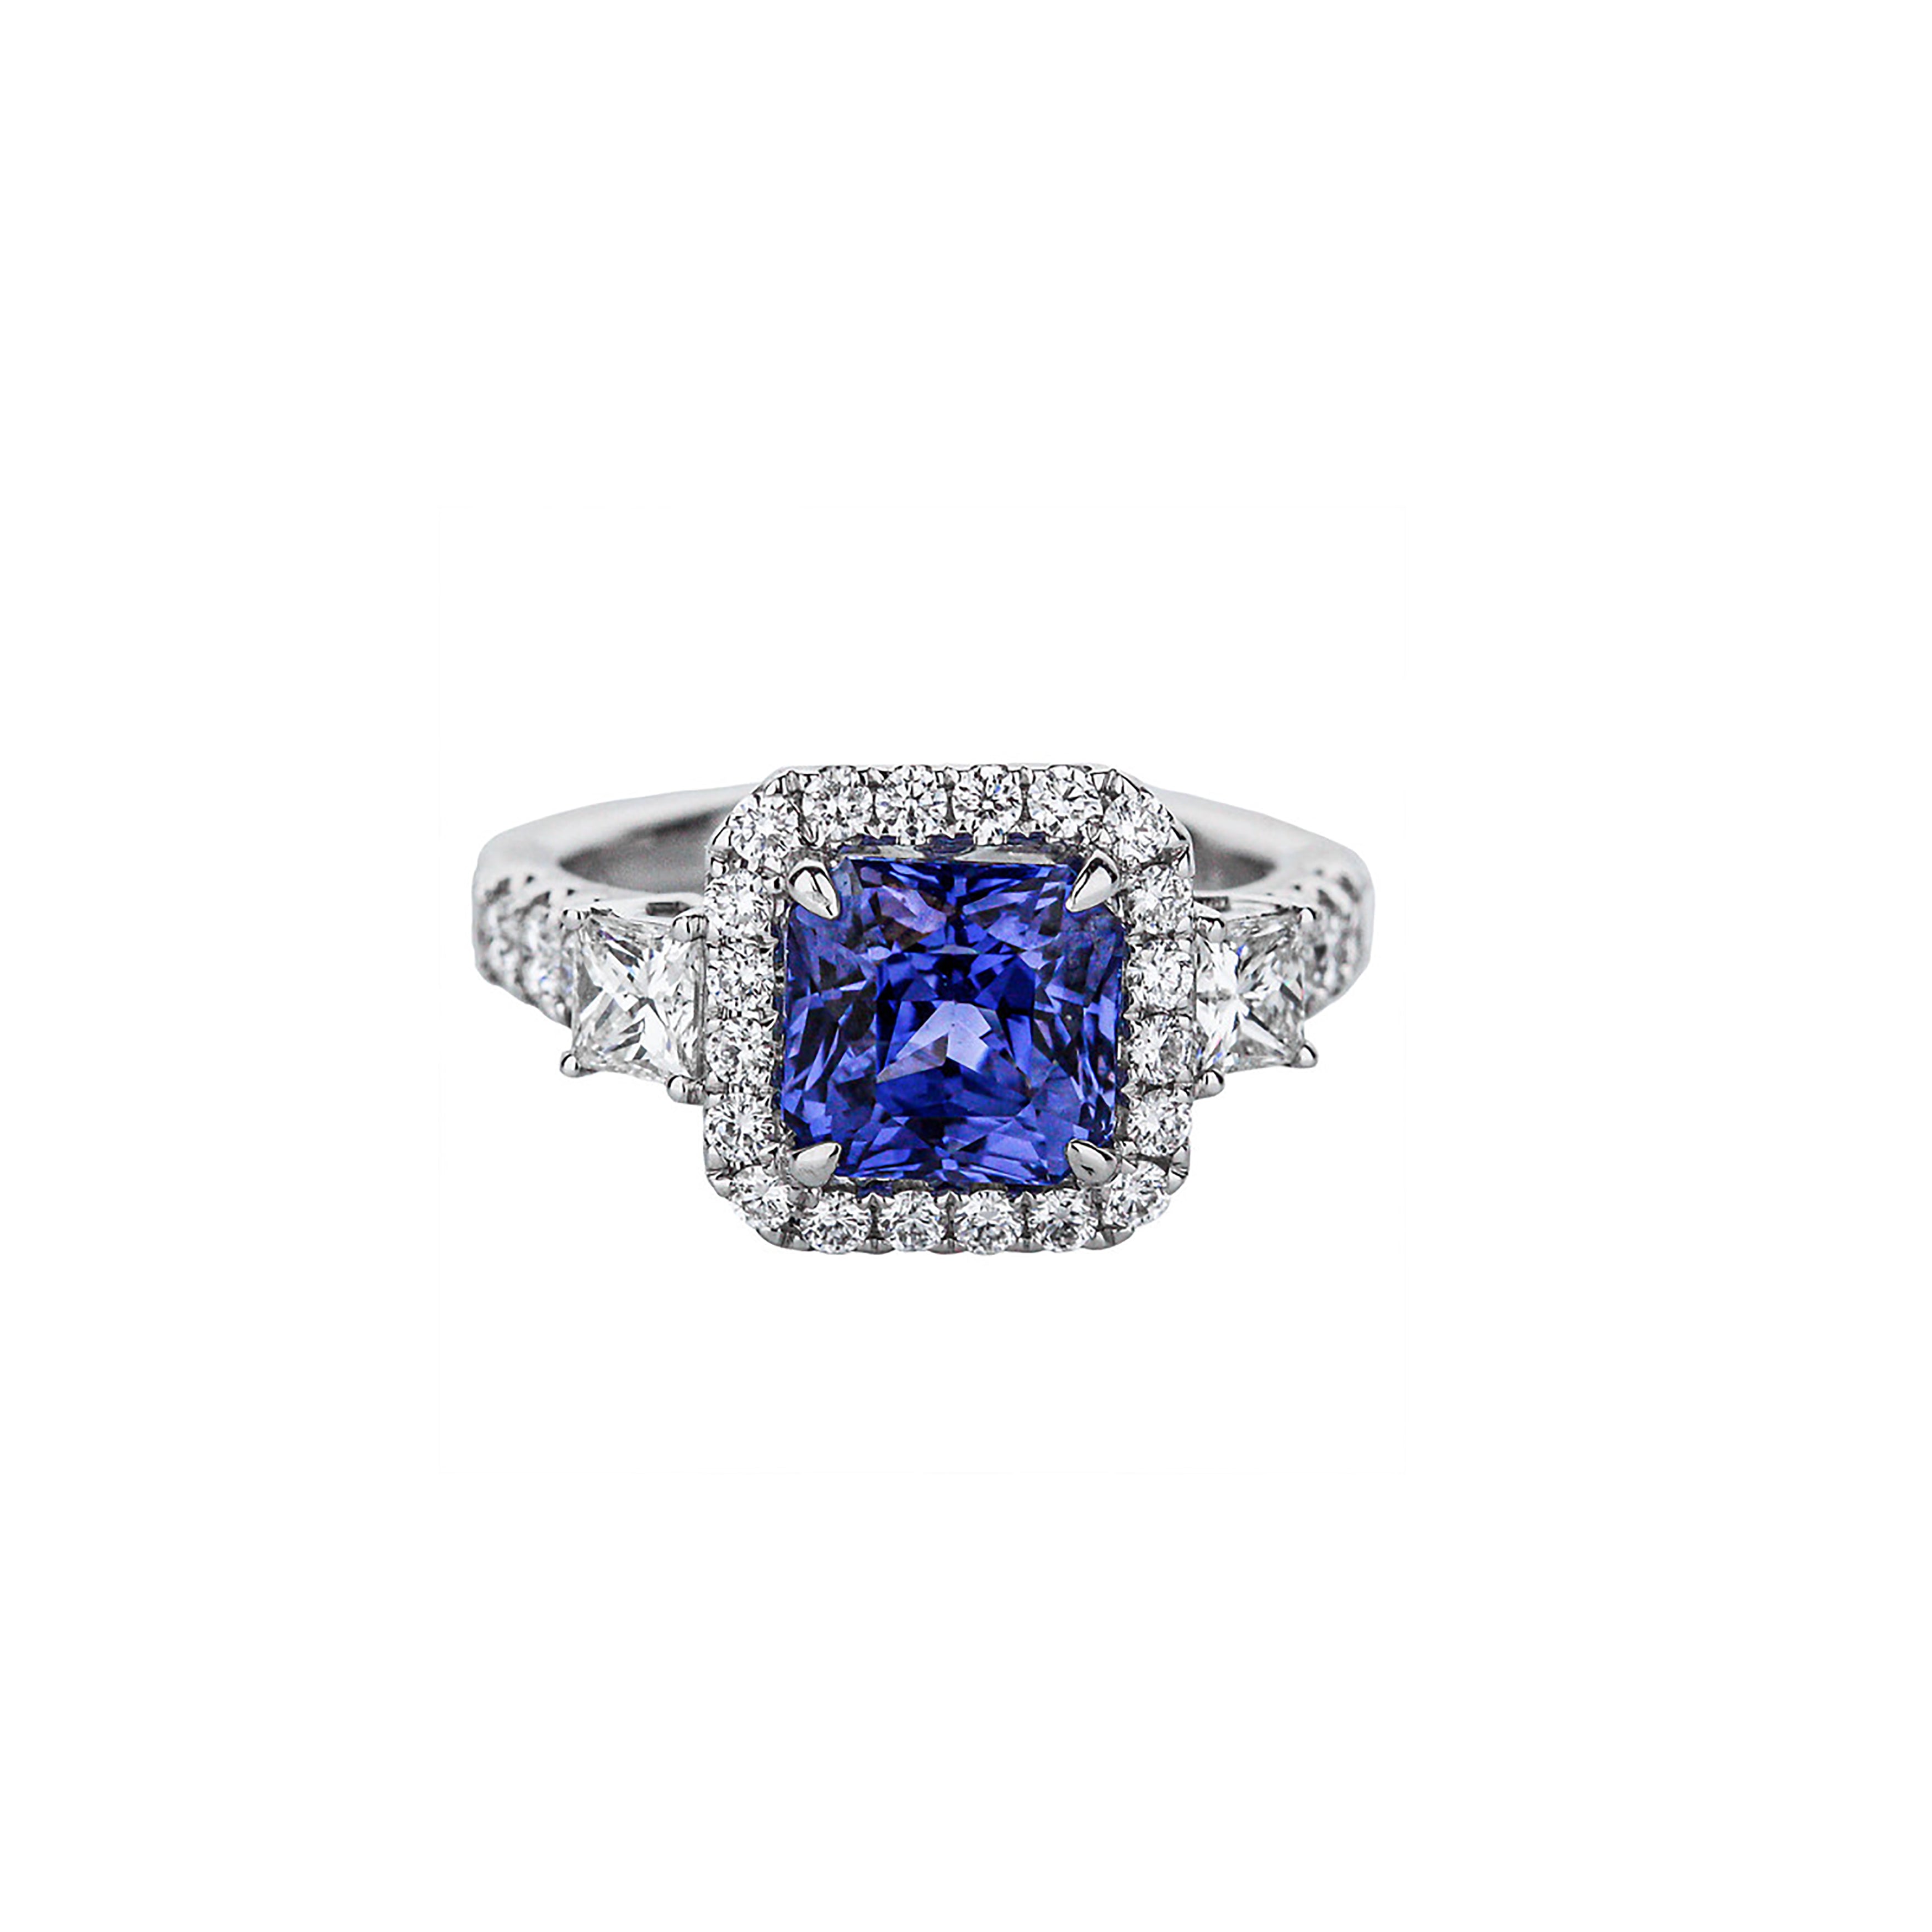 18K White Gold Radiant-Cut Blue Sapphire With Accent Princess-Cut Diamonds Ring